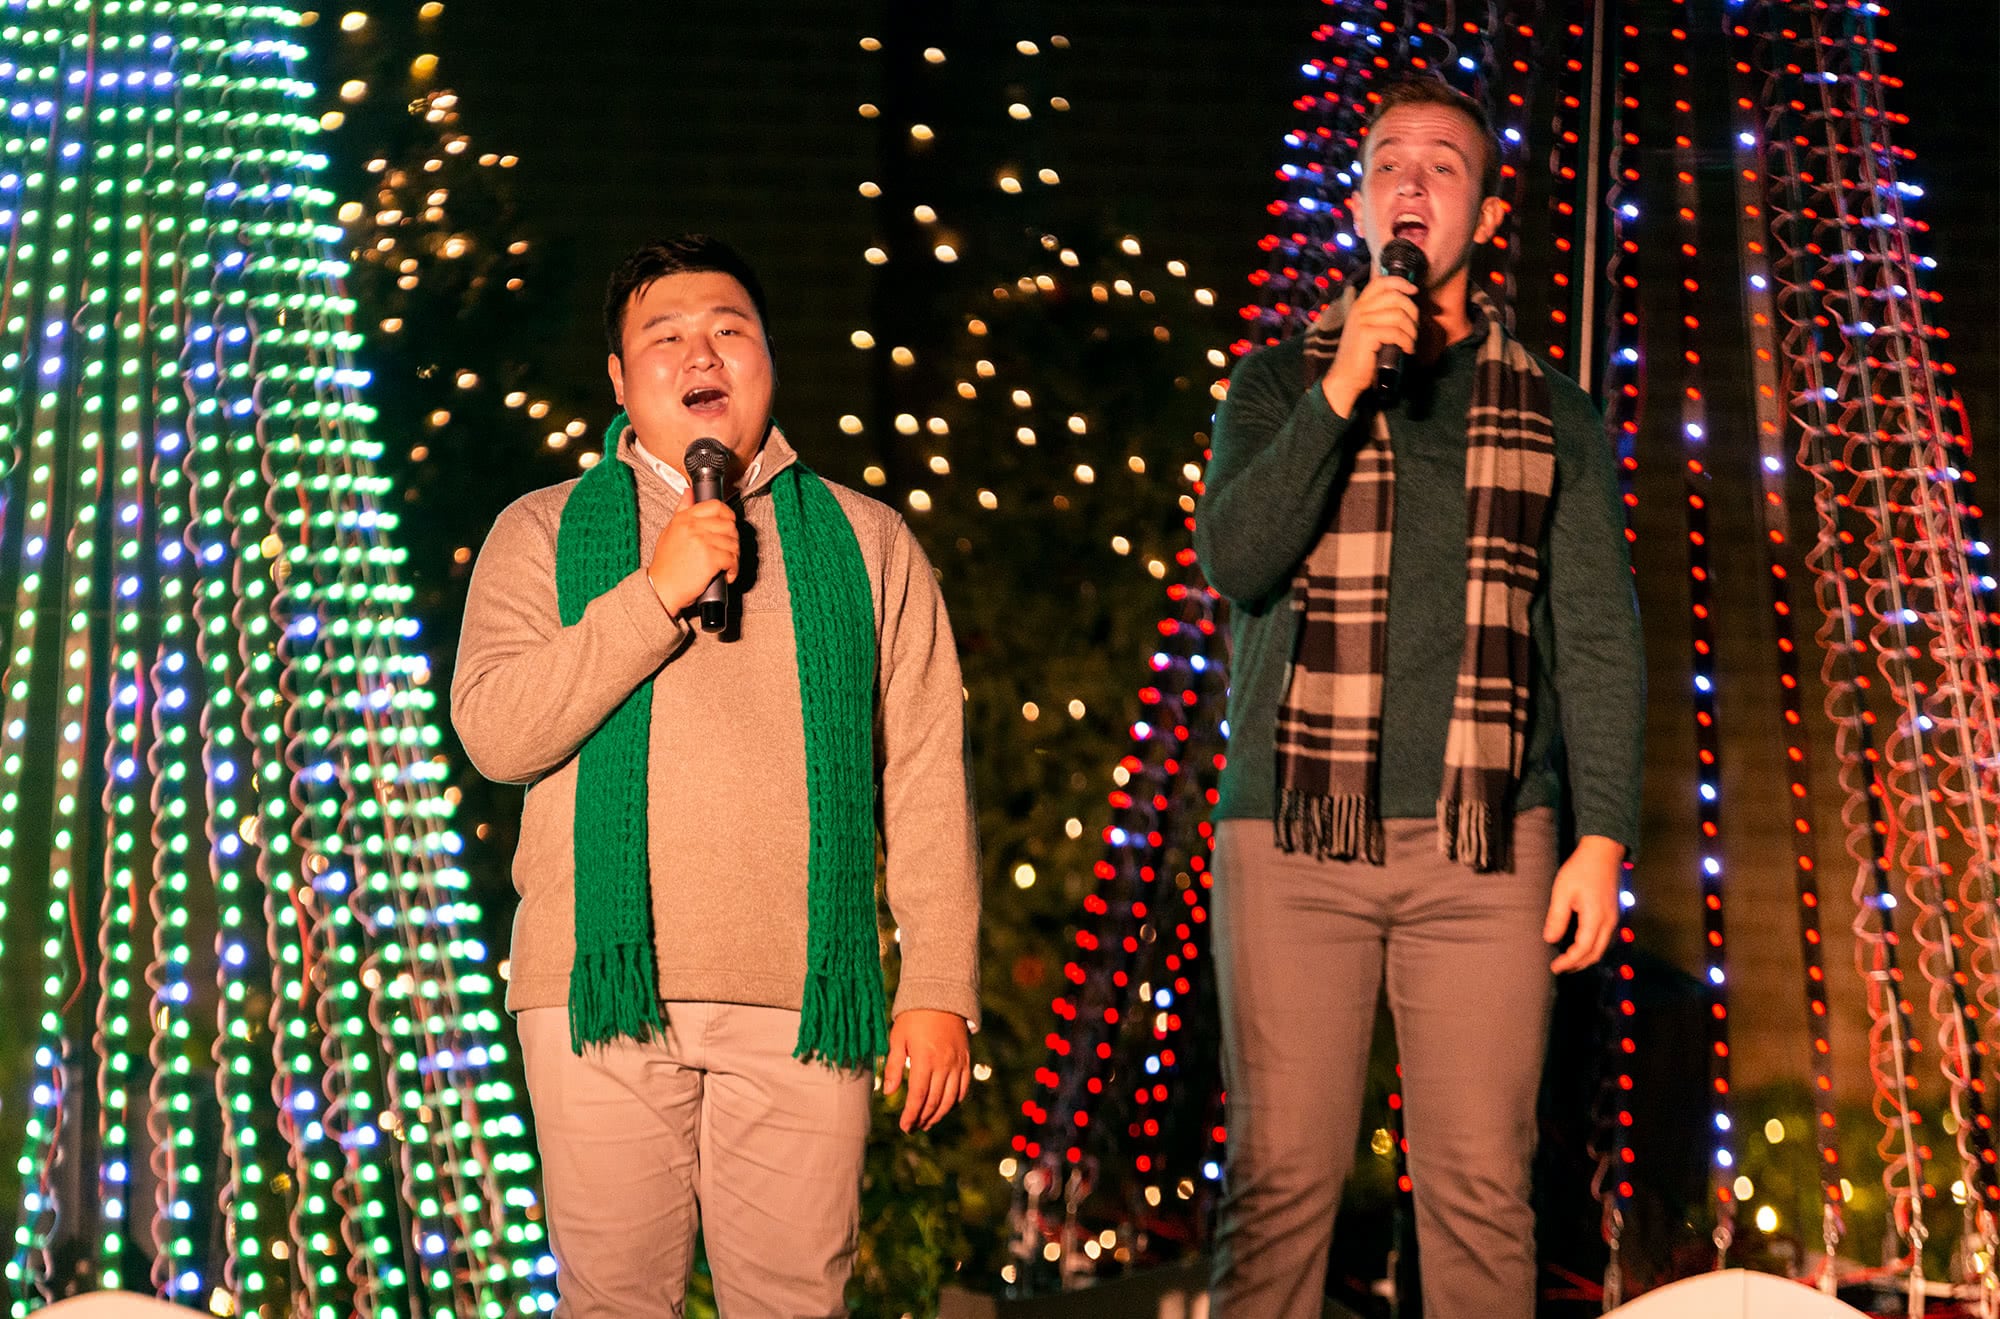 Spirit Singers sing on the Christmas Lights stage